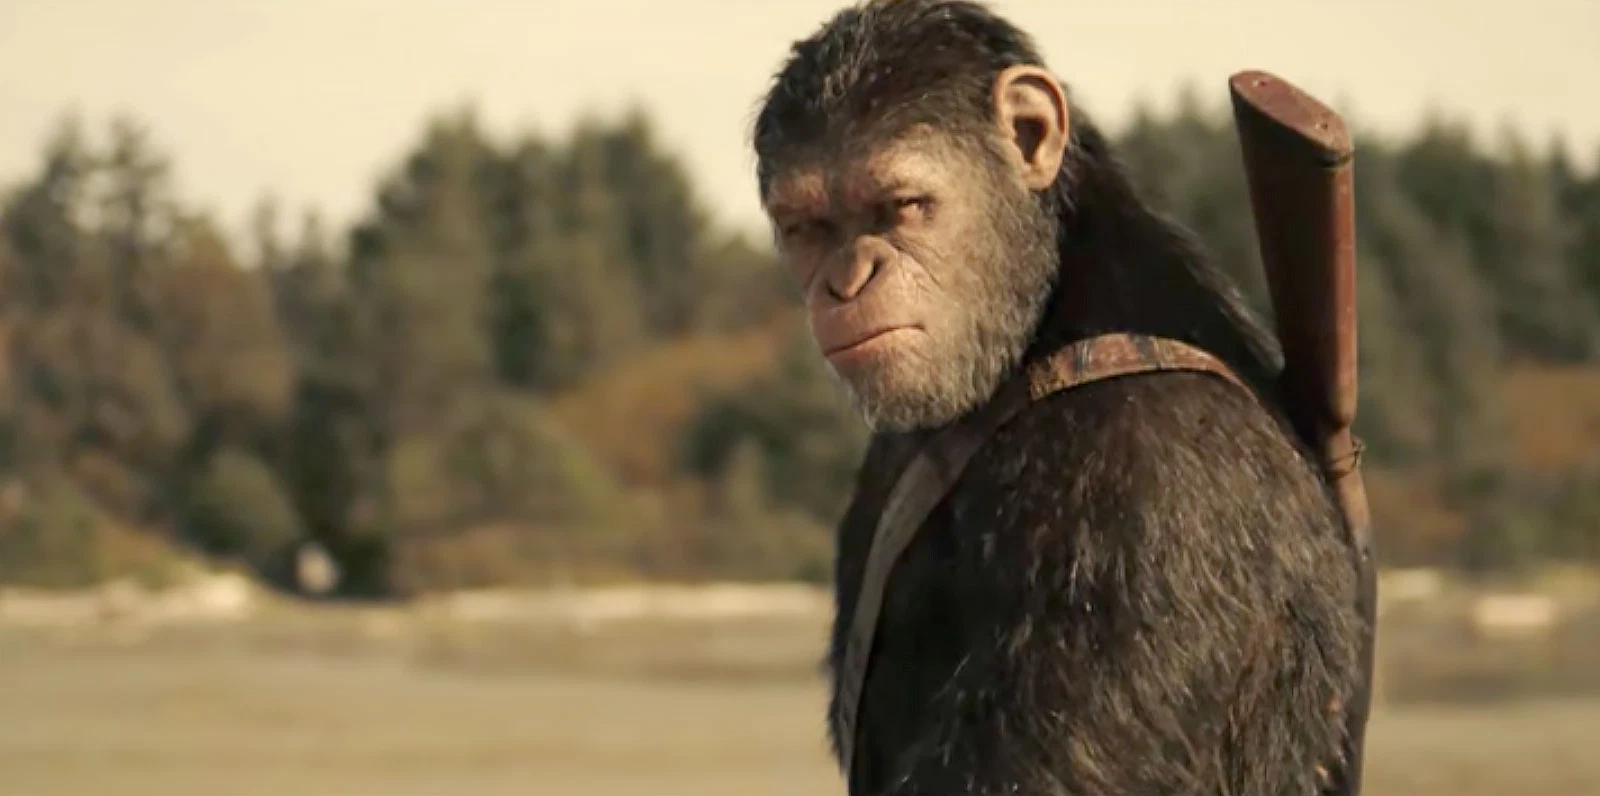 Andy Serkis in still from War for the Planet of the Apes (2017)